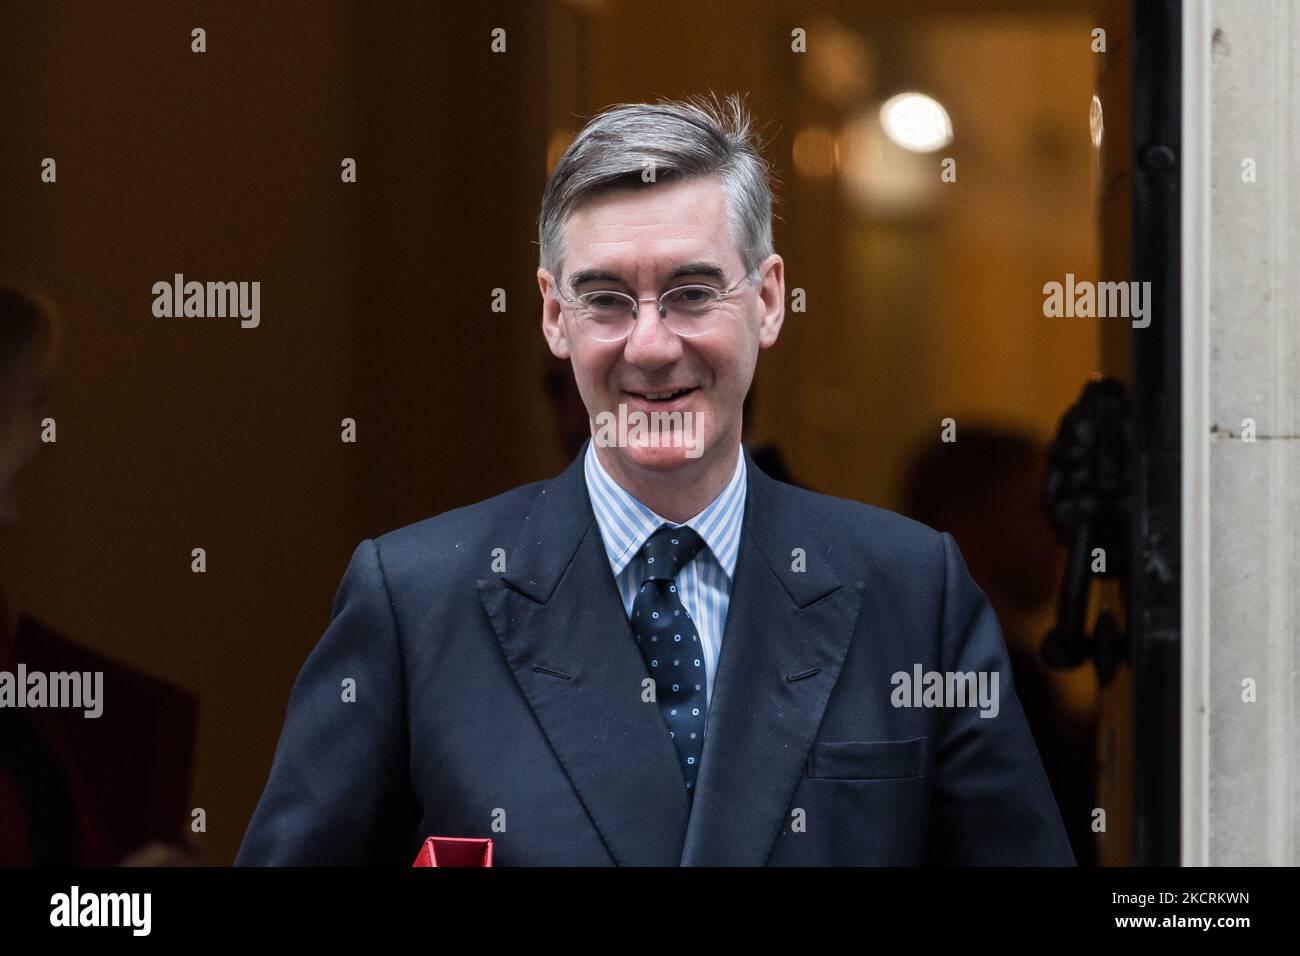 LONDON, UNITED KINGDOM - OCTOBER 27, 2021: Lord President of the Council and Leader of the House of Commons Jacob Rees-Mogg leaves Downing Street in central London after attending the weekly Cabinet meeting on October 27, 2021 in London, England. Today, Chancellor Rishi Sunak is due to announce his Autumn budget and spending review in the House of Commons. (Photo by WIktor Szymanowicz/NurPhoto) Stock Photo